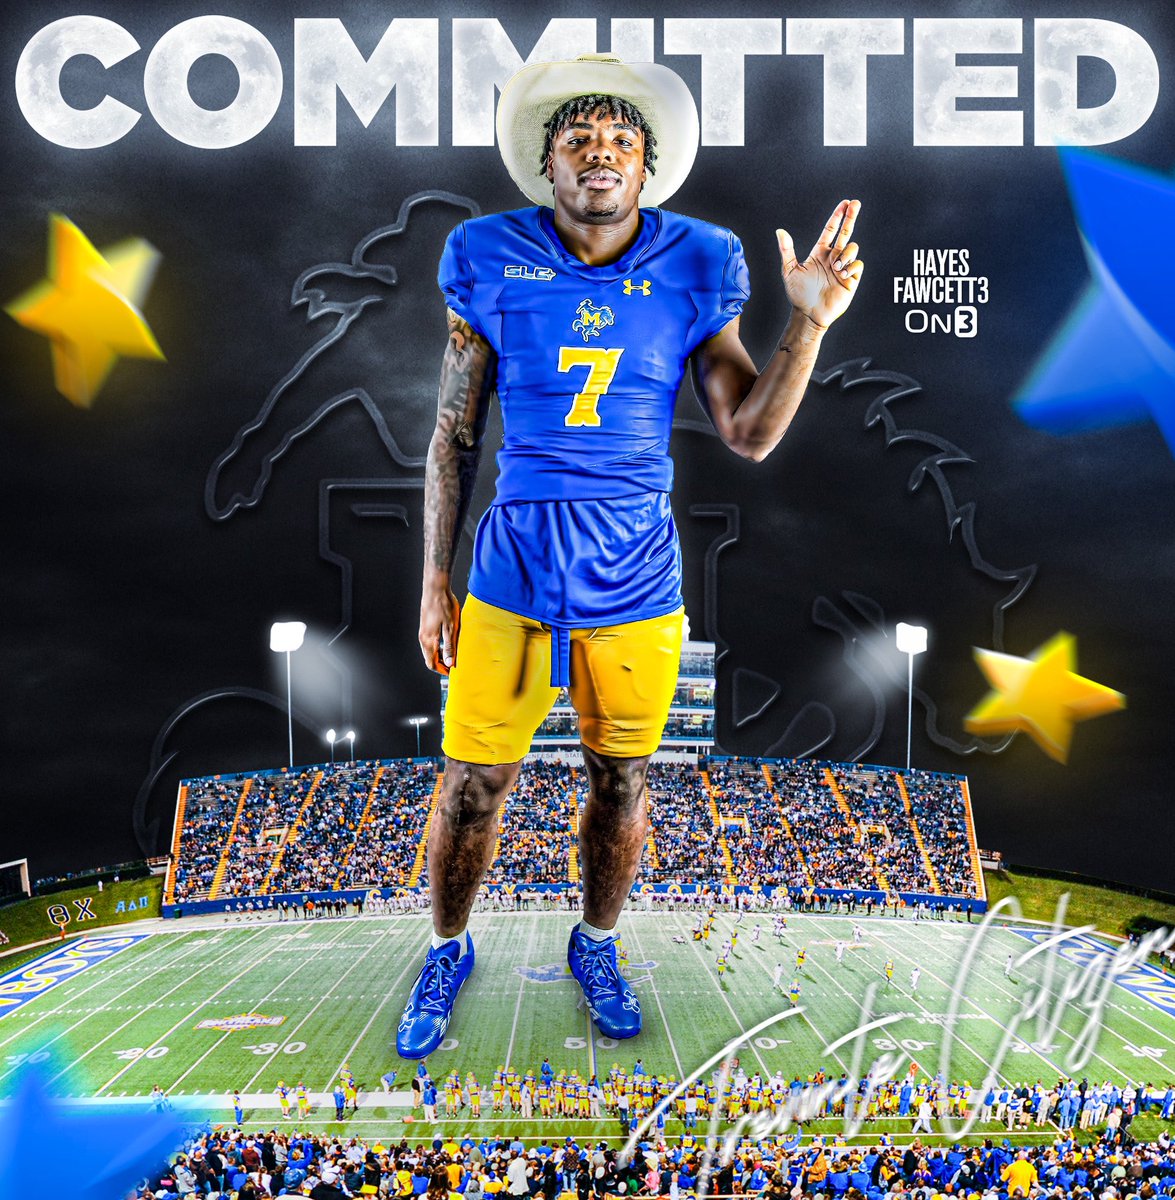 BREAKING: Former Miami RB TreVonte’ Citizen is returning home and has Committed to McNeese State, he tells @on3sports The 6’1 220 RB from Lake Charles, LA will have all 4 years of eligibility remaining Was ranked as the No. 2 RB in the ‘22 Class (per On3)